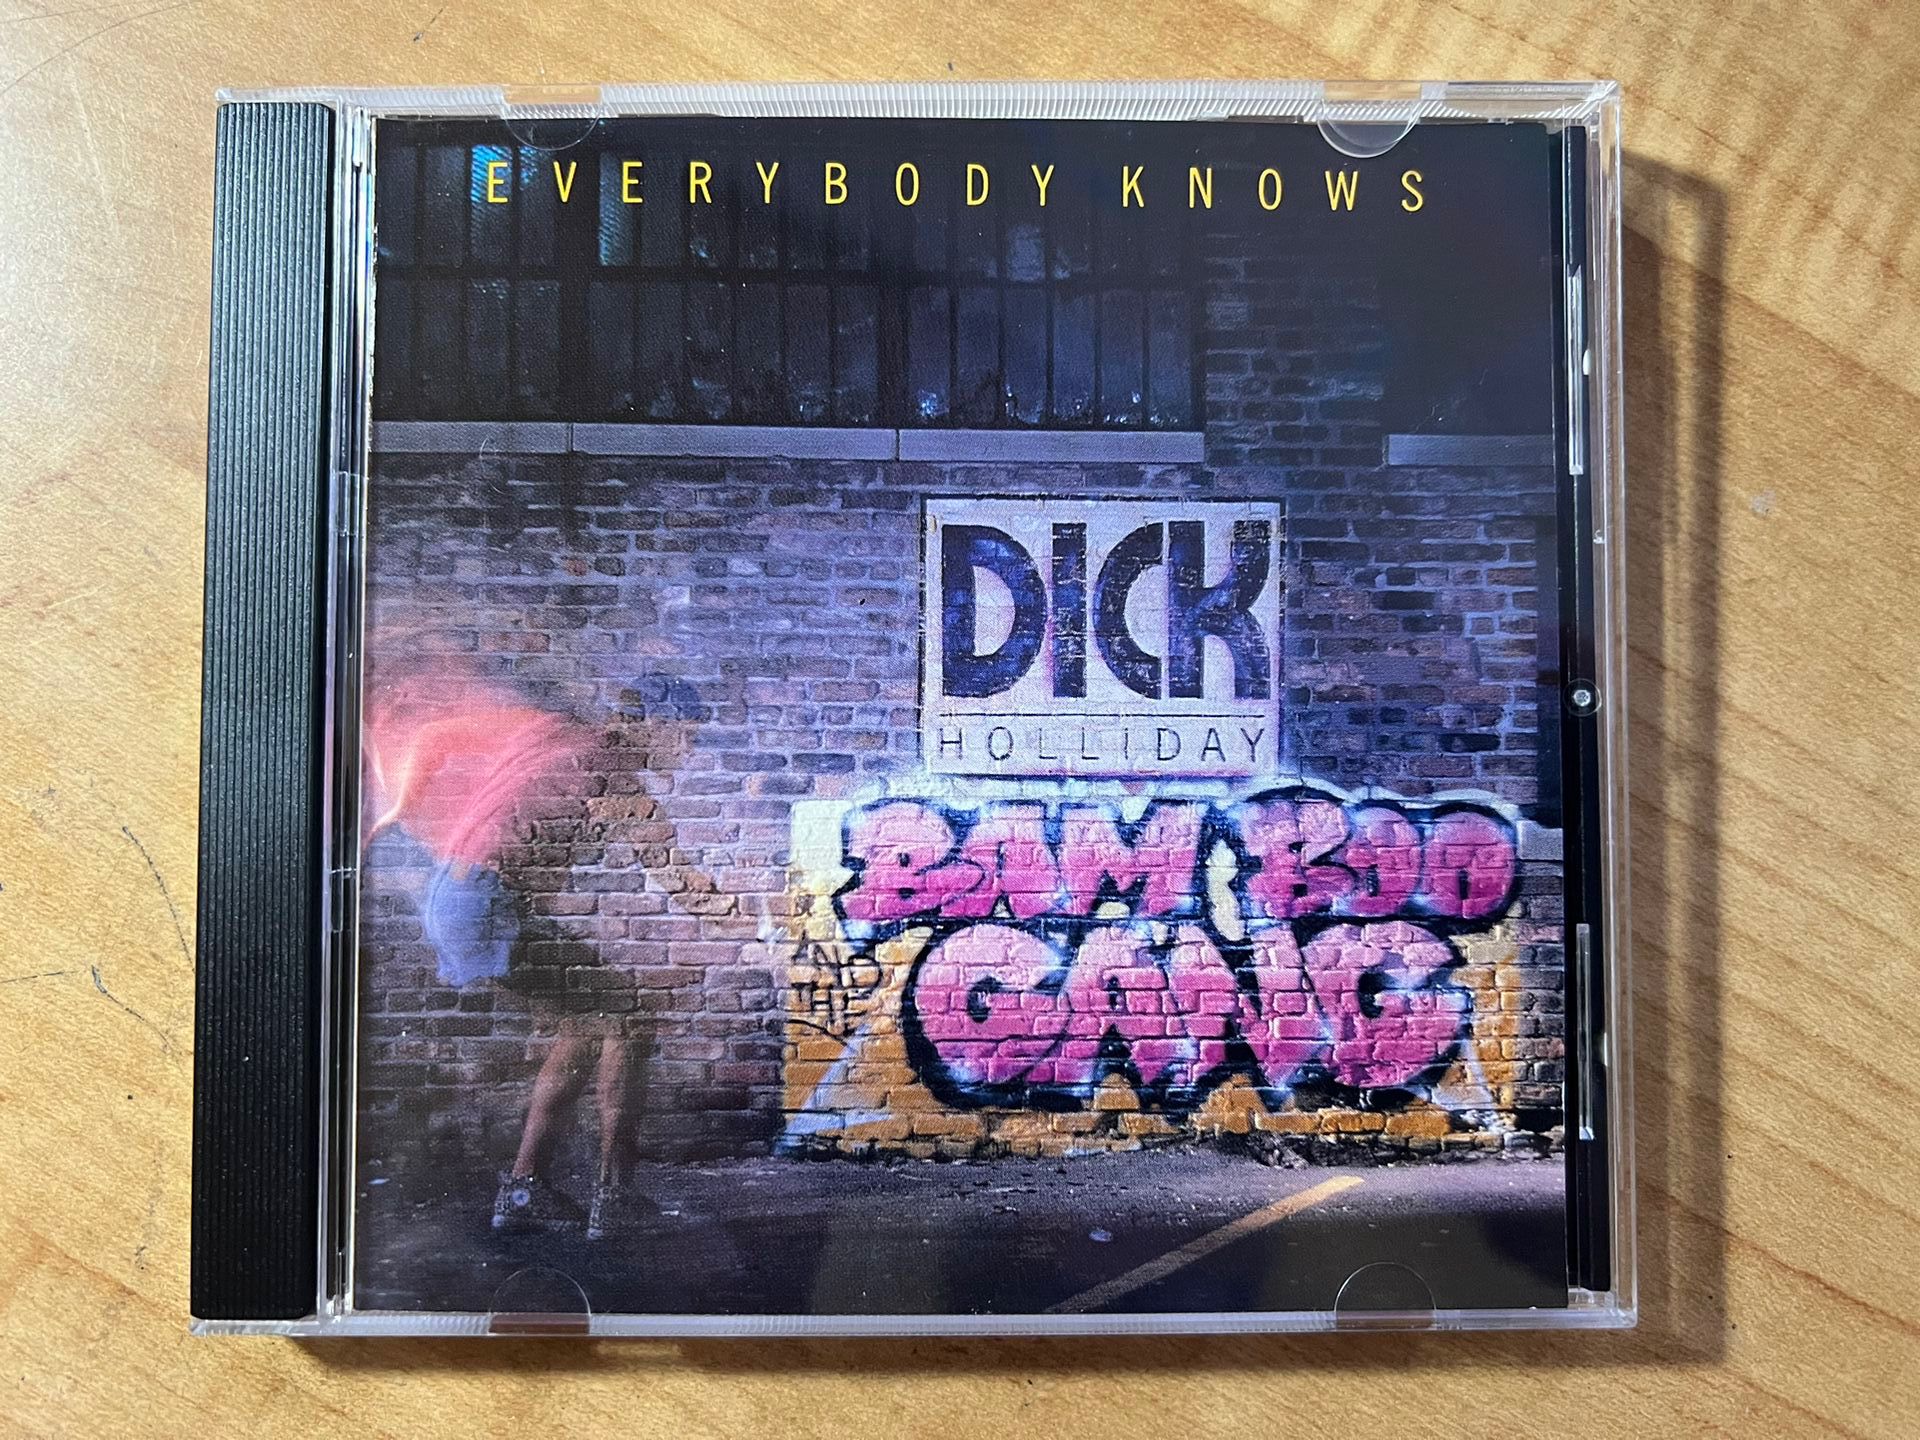 DICK HOLLIDAY and the Bamboo Gang CD Everybody Knows 1989 Rare Rock OOP